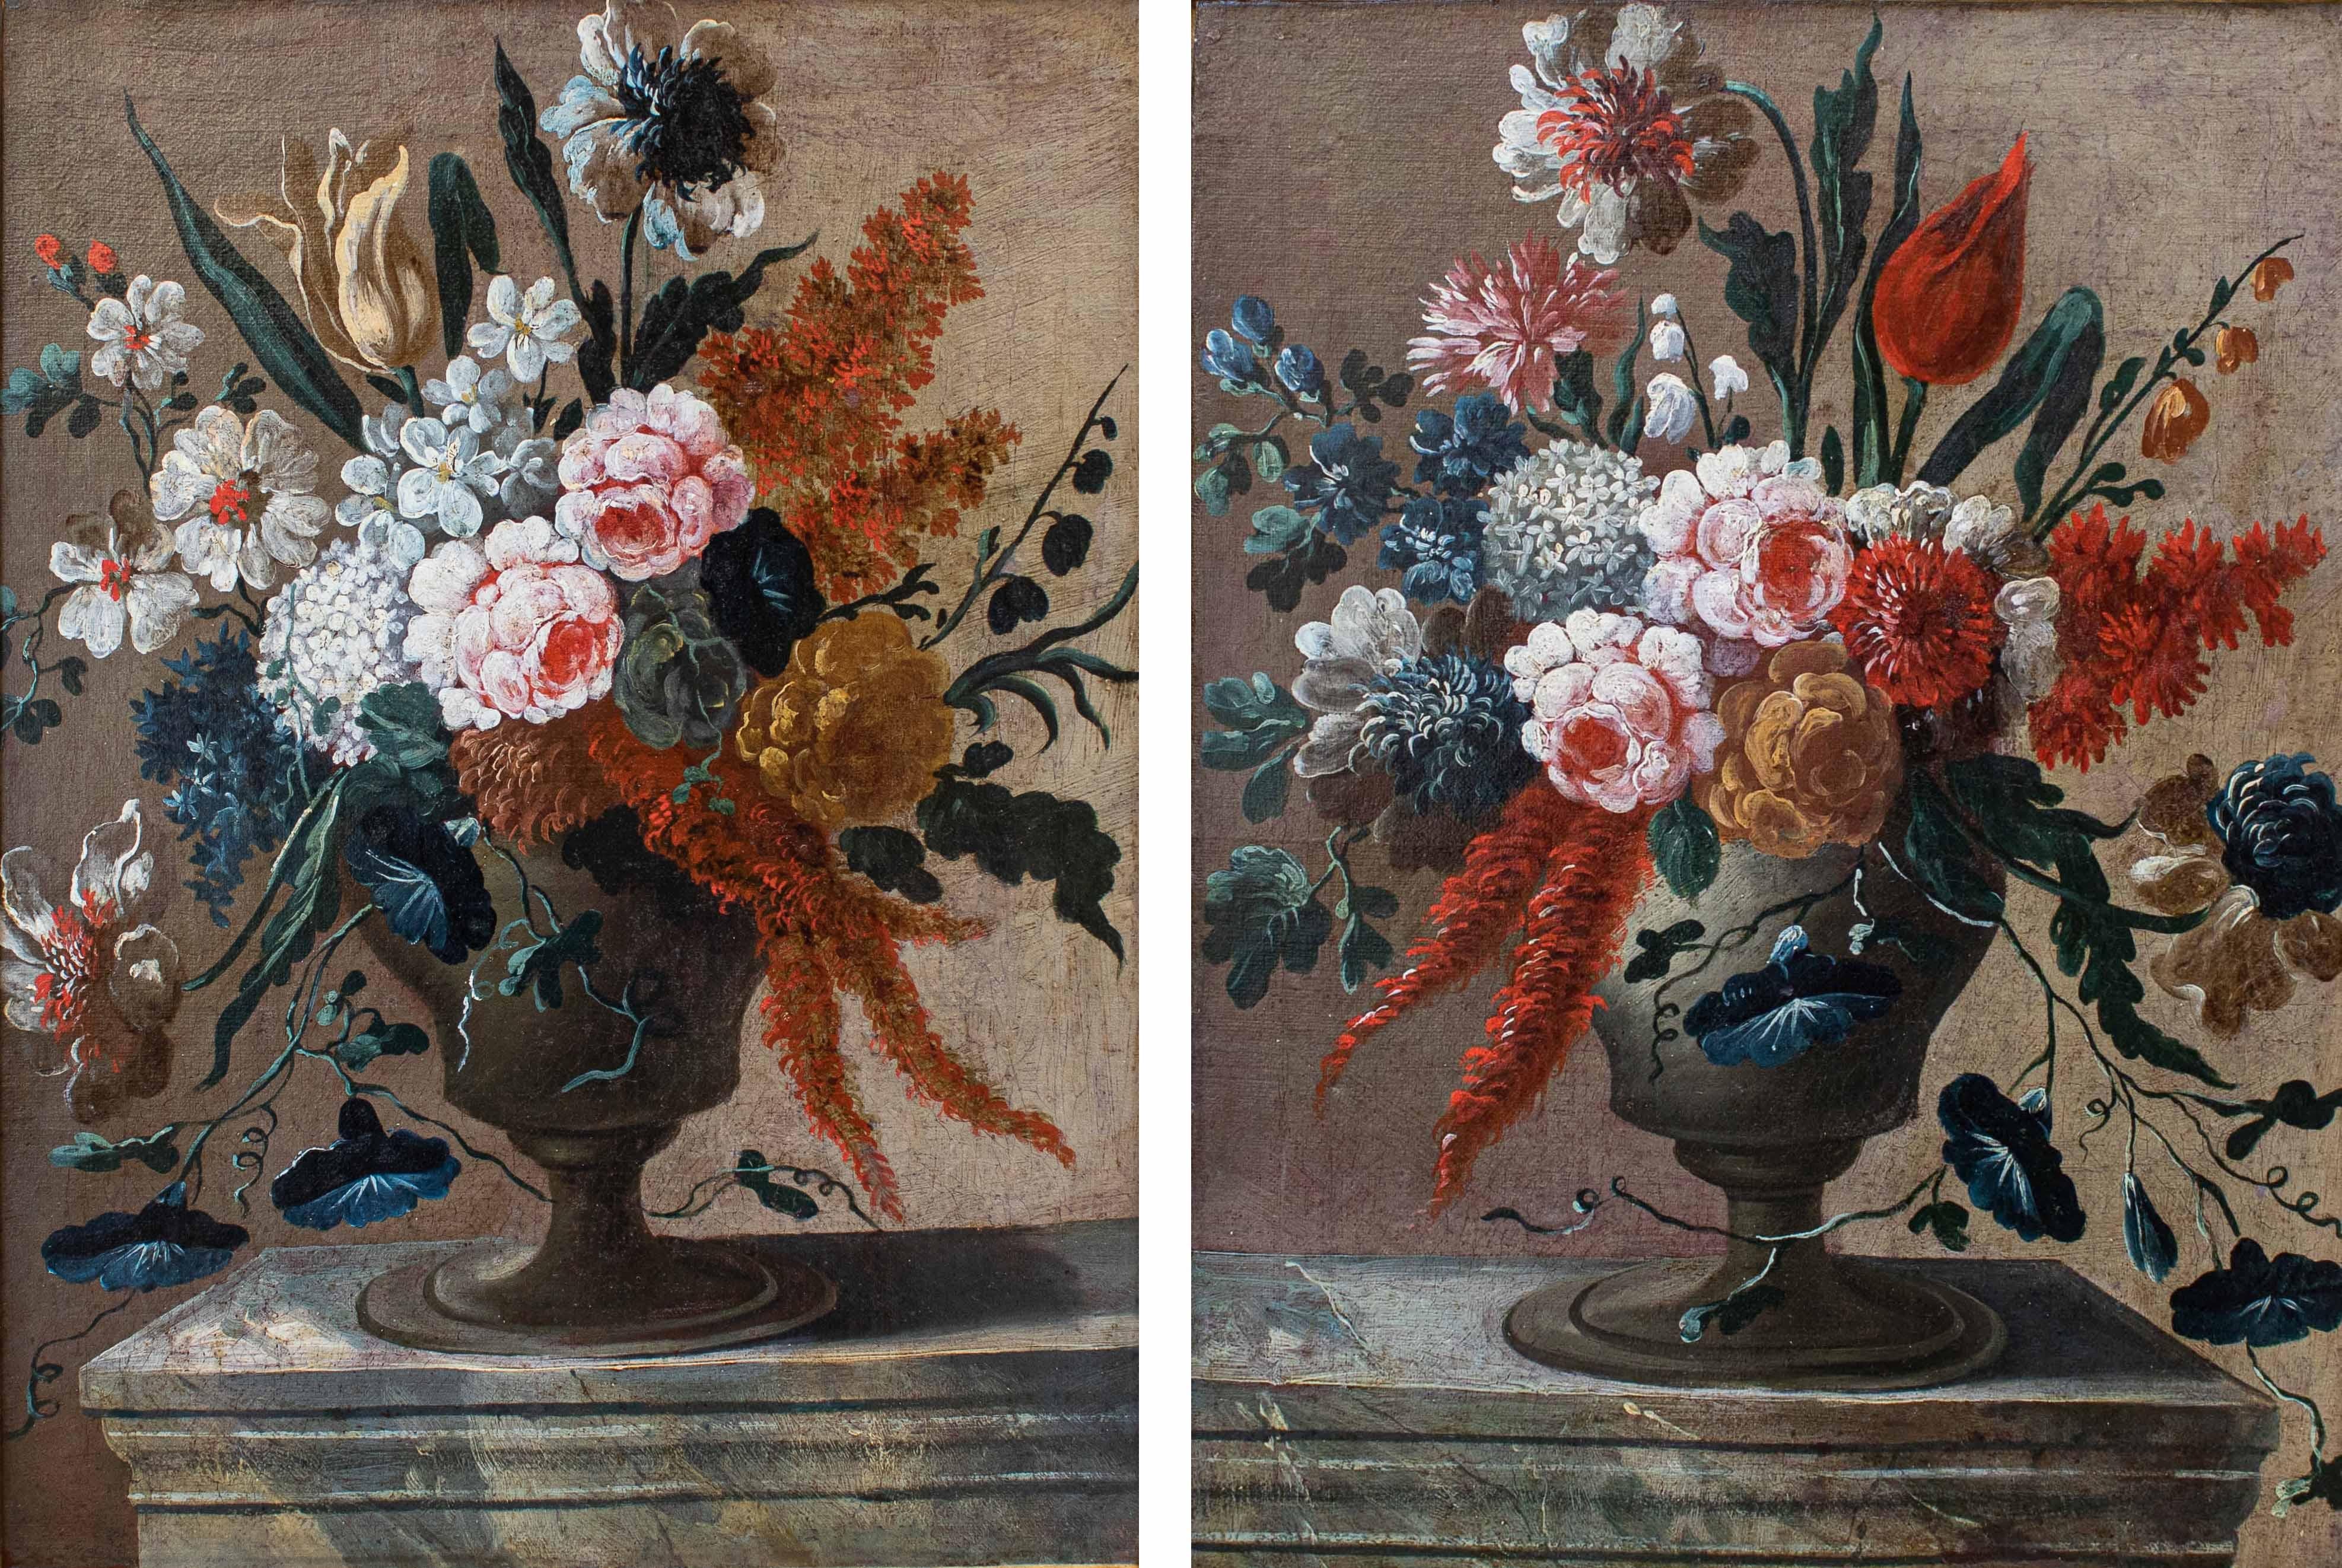 Roman School, second half of the 17th century
Pair of still lifes with vases of flowers
Oil on canvas, 47 x 35 cm - with frame 58 x 43 cm

The refined pair of still lifes in question is characterized by a lively and at the same time balanced